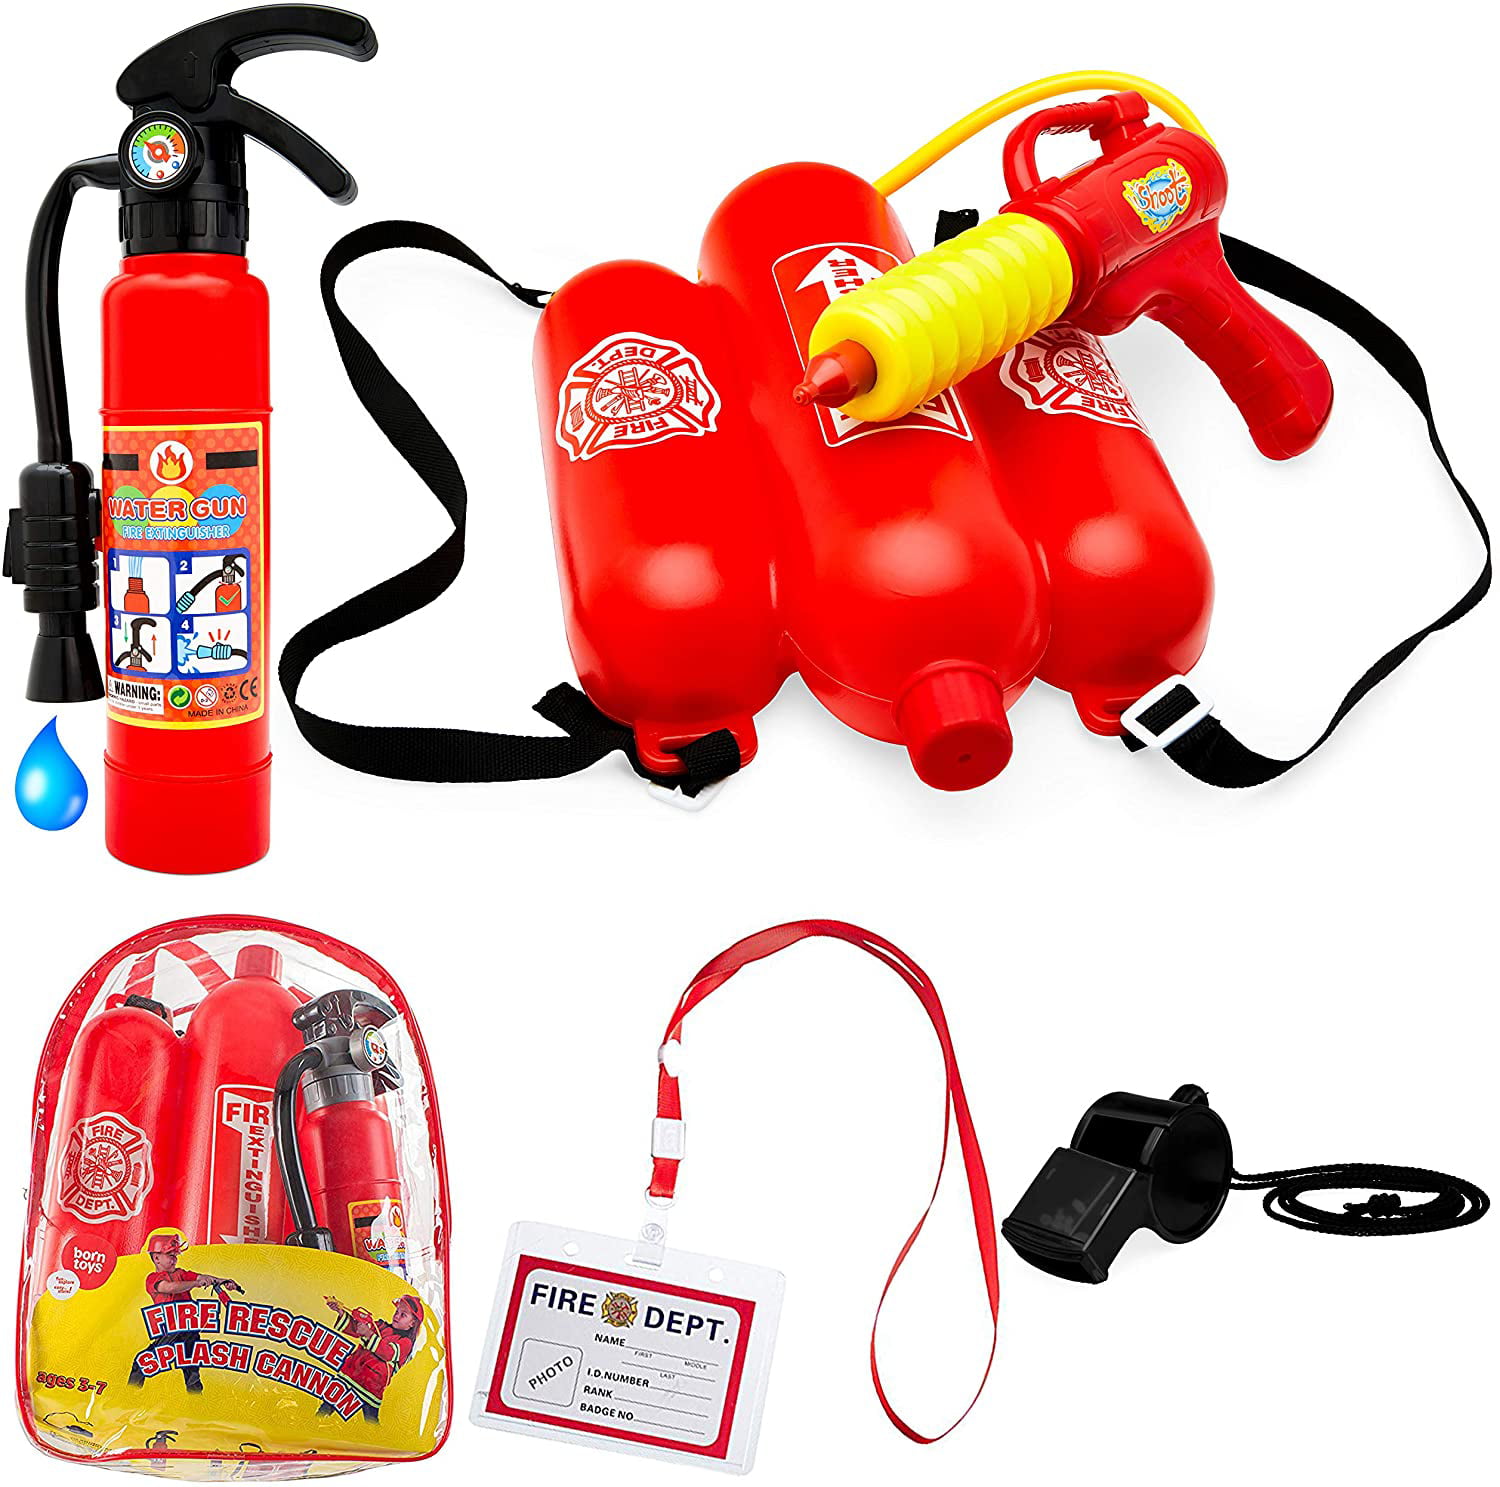 5 pcs Fireman Toys for Kids fireman Costume 5 Piece Premium Firefighter Water Gun Toy Set and fire Toy Extinguisher. for Fireman Costume